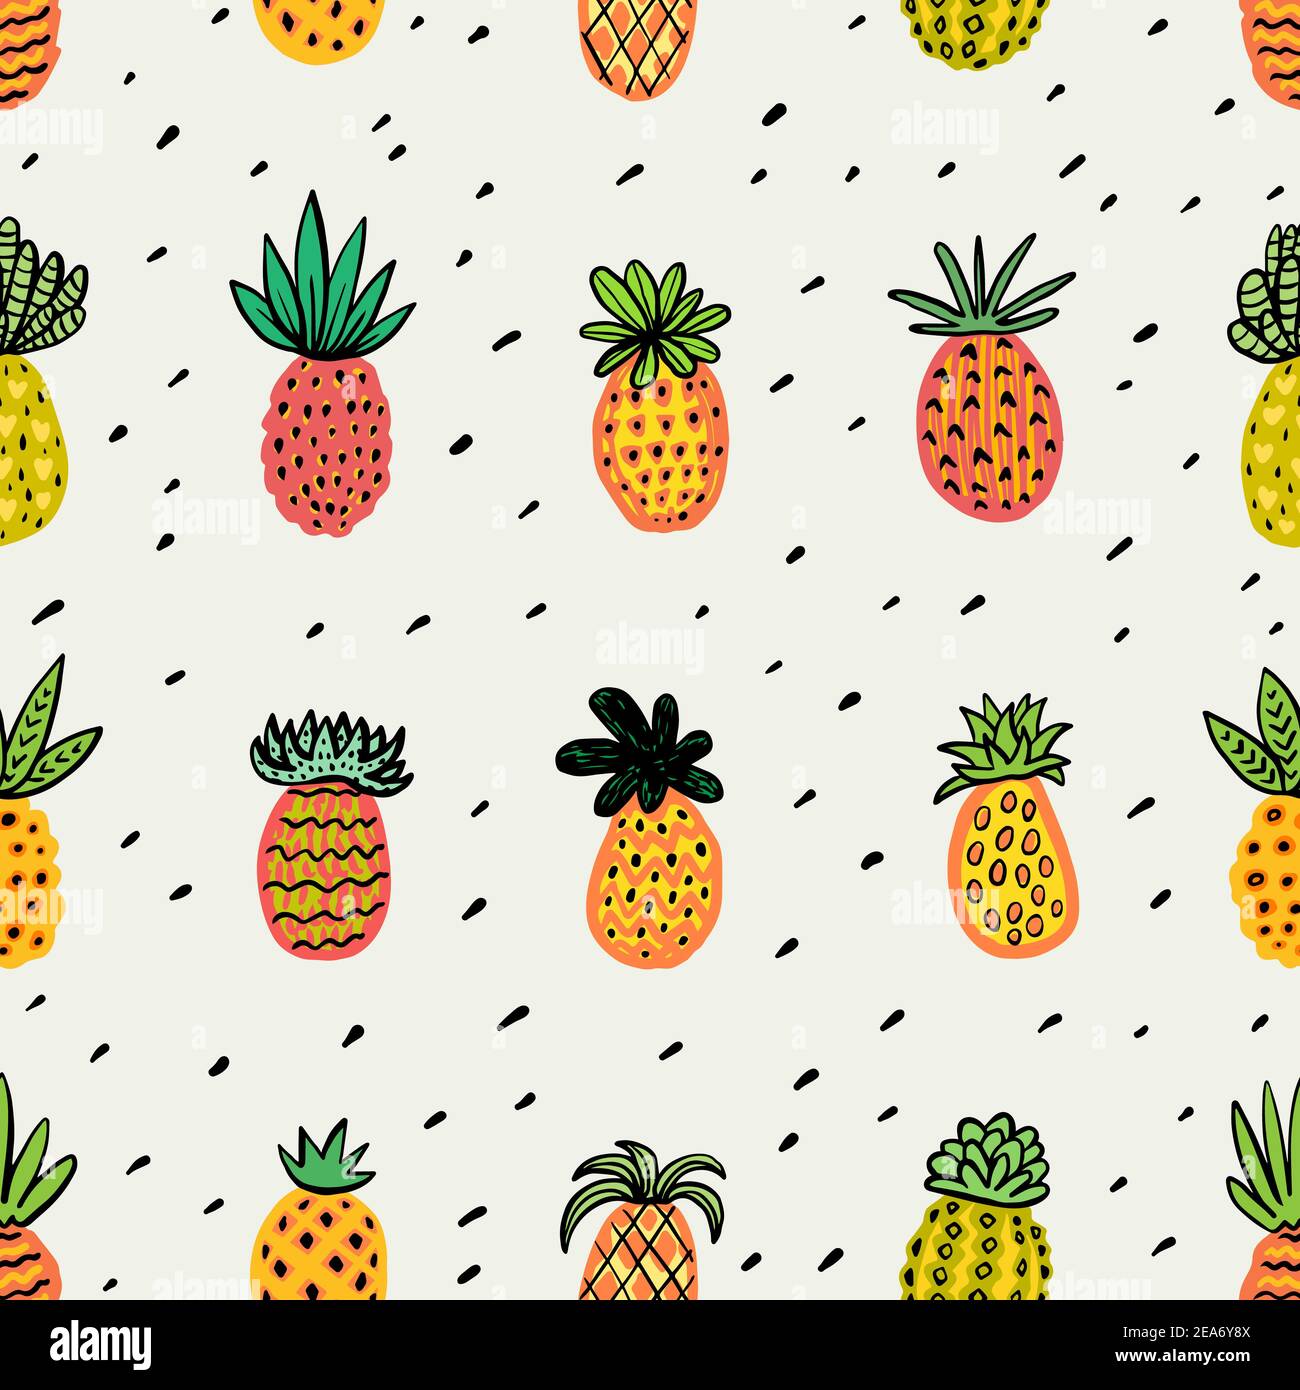 Seamless sunny pineapple pattern. Decorative Pinapple with different textures in warm colors. Exotic fruits background For Fashion print textile Stock Vector